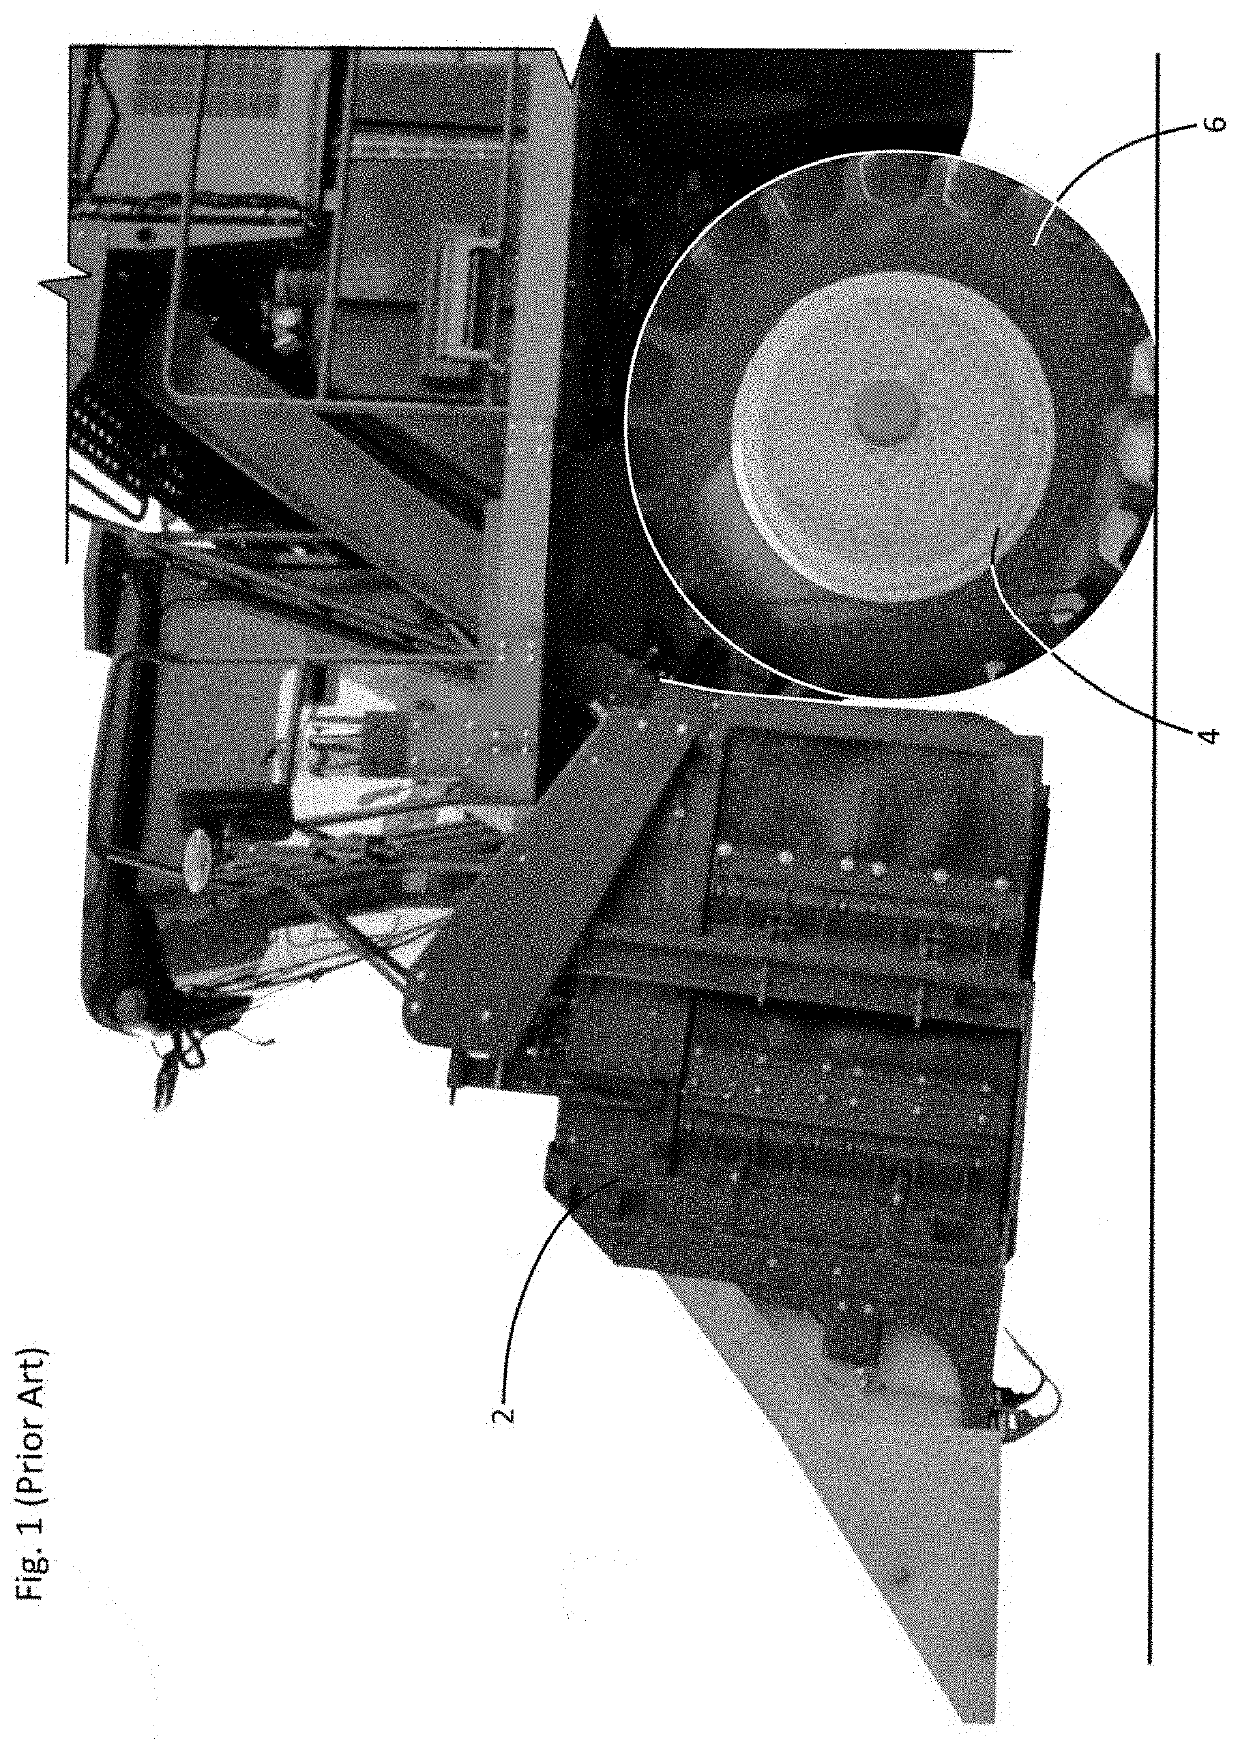 Assembly for Converting a Wheel Drive Harvester to Track Drive